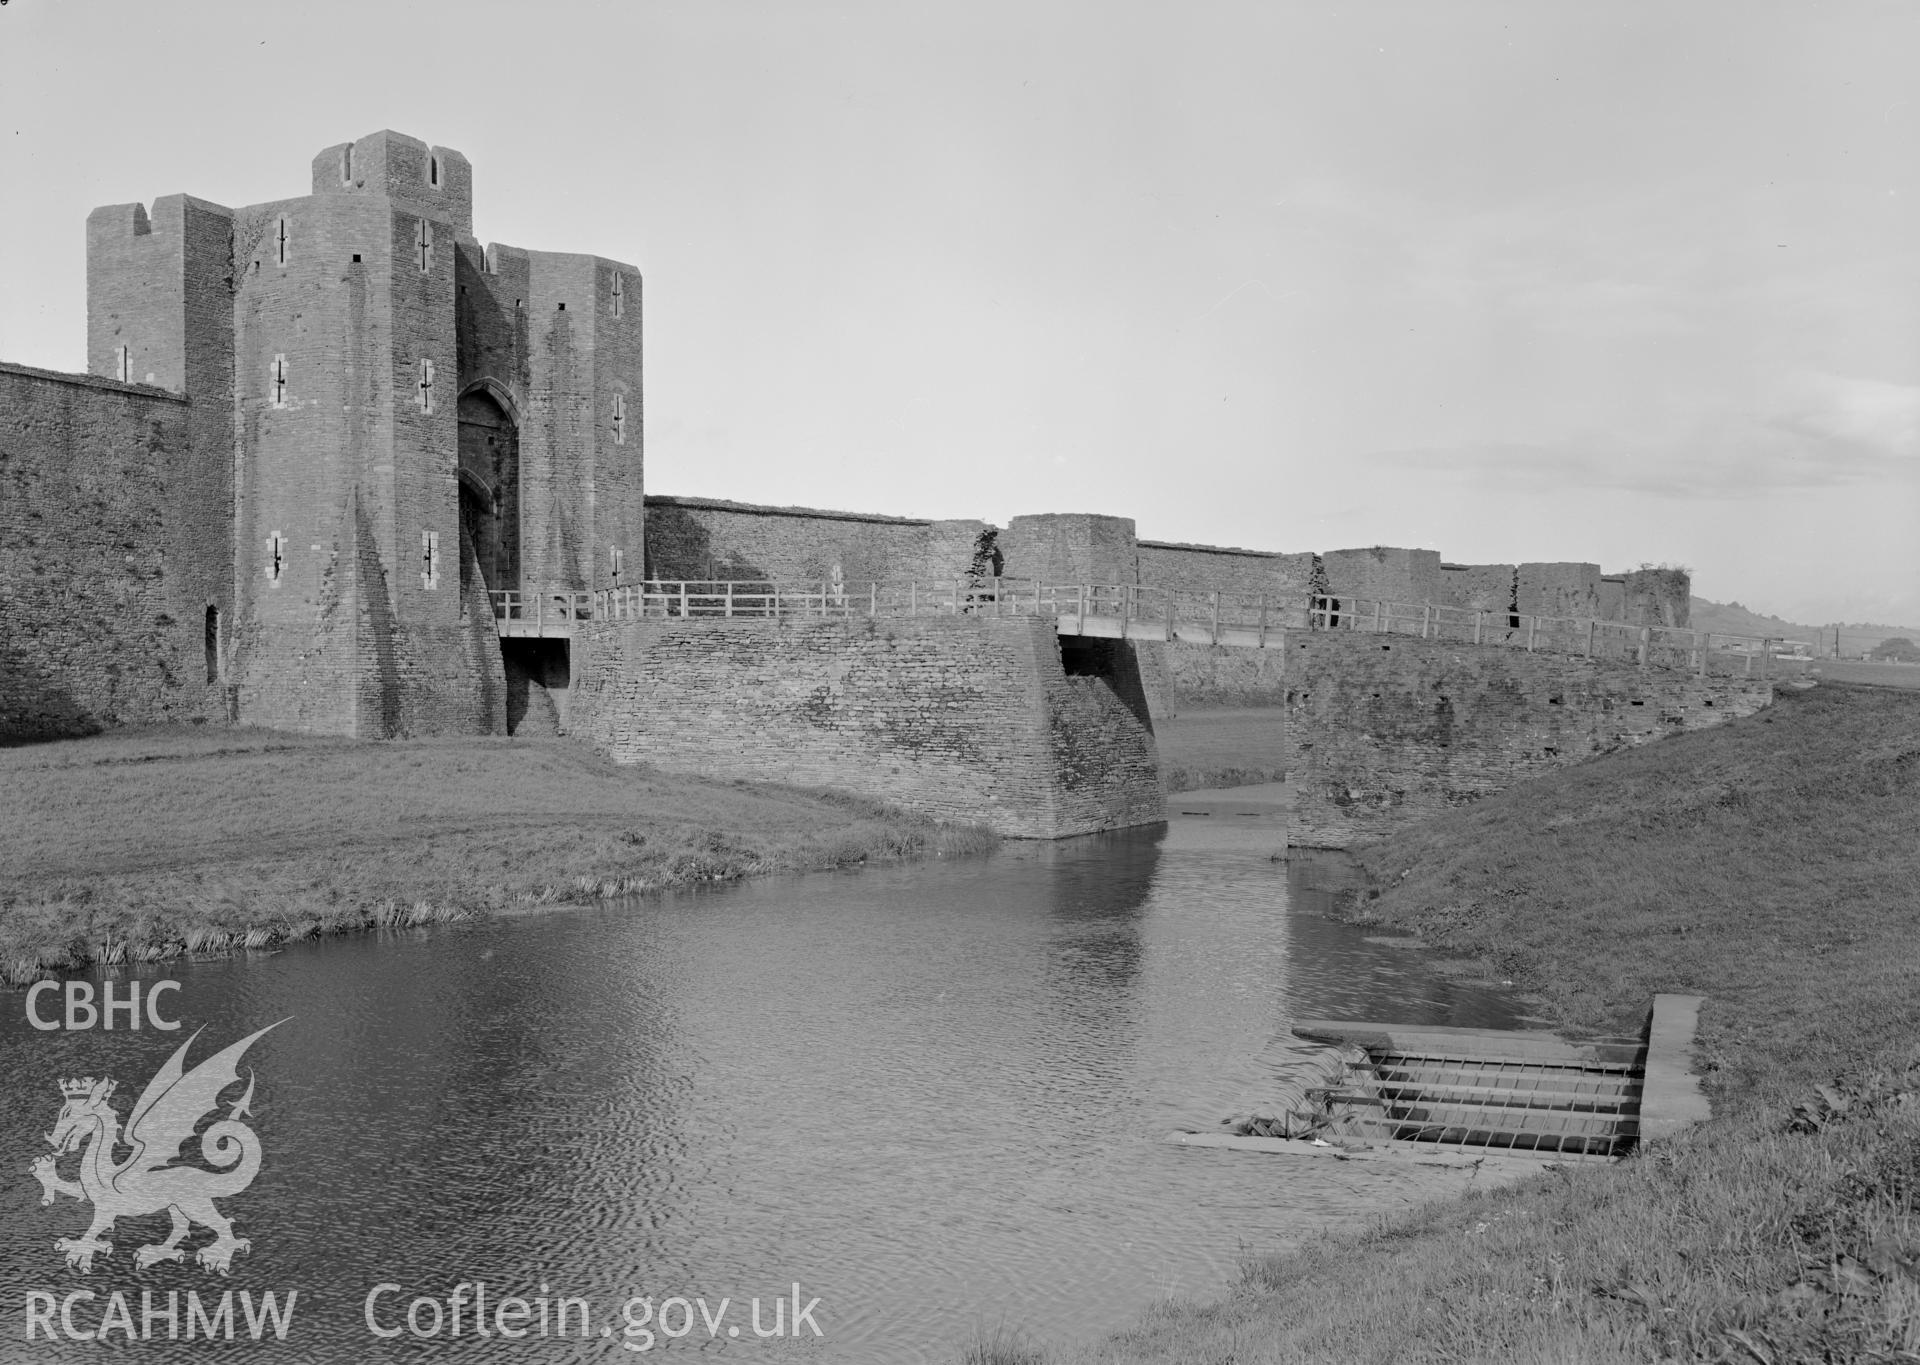 D.O.E photograph of Caerphilly Castle - east gate and bridge over outer moat from the south east.